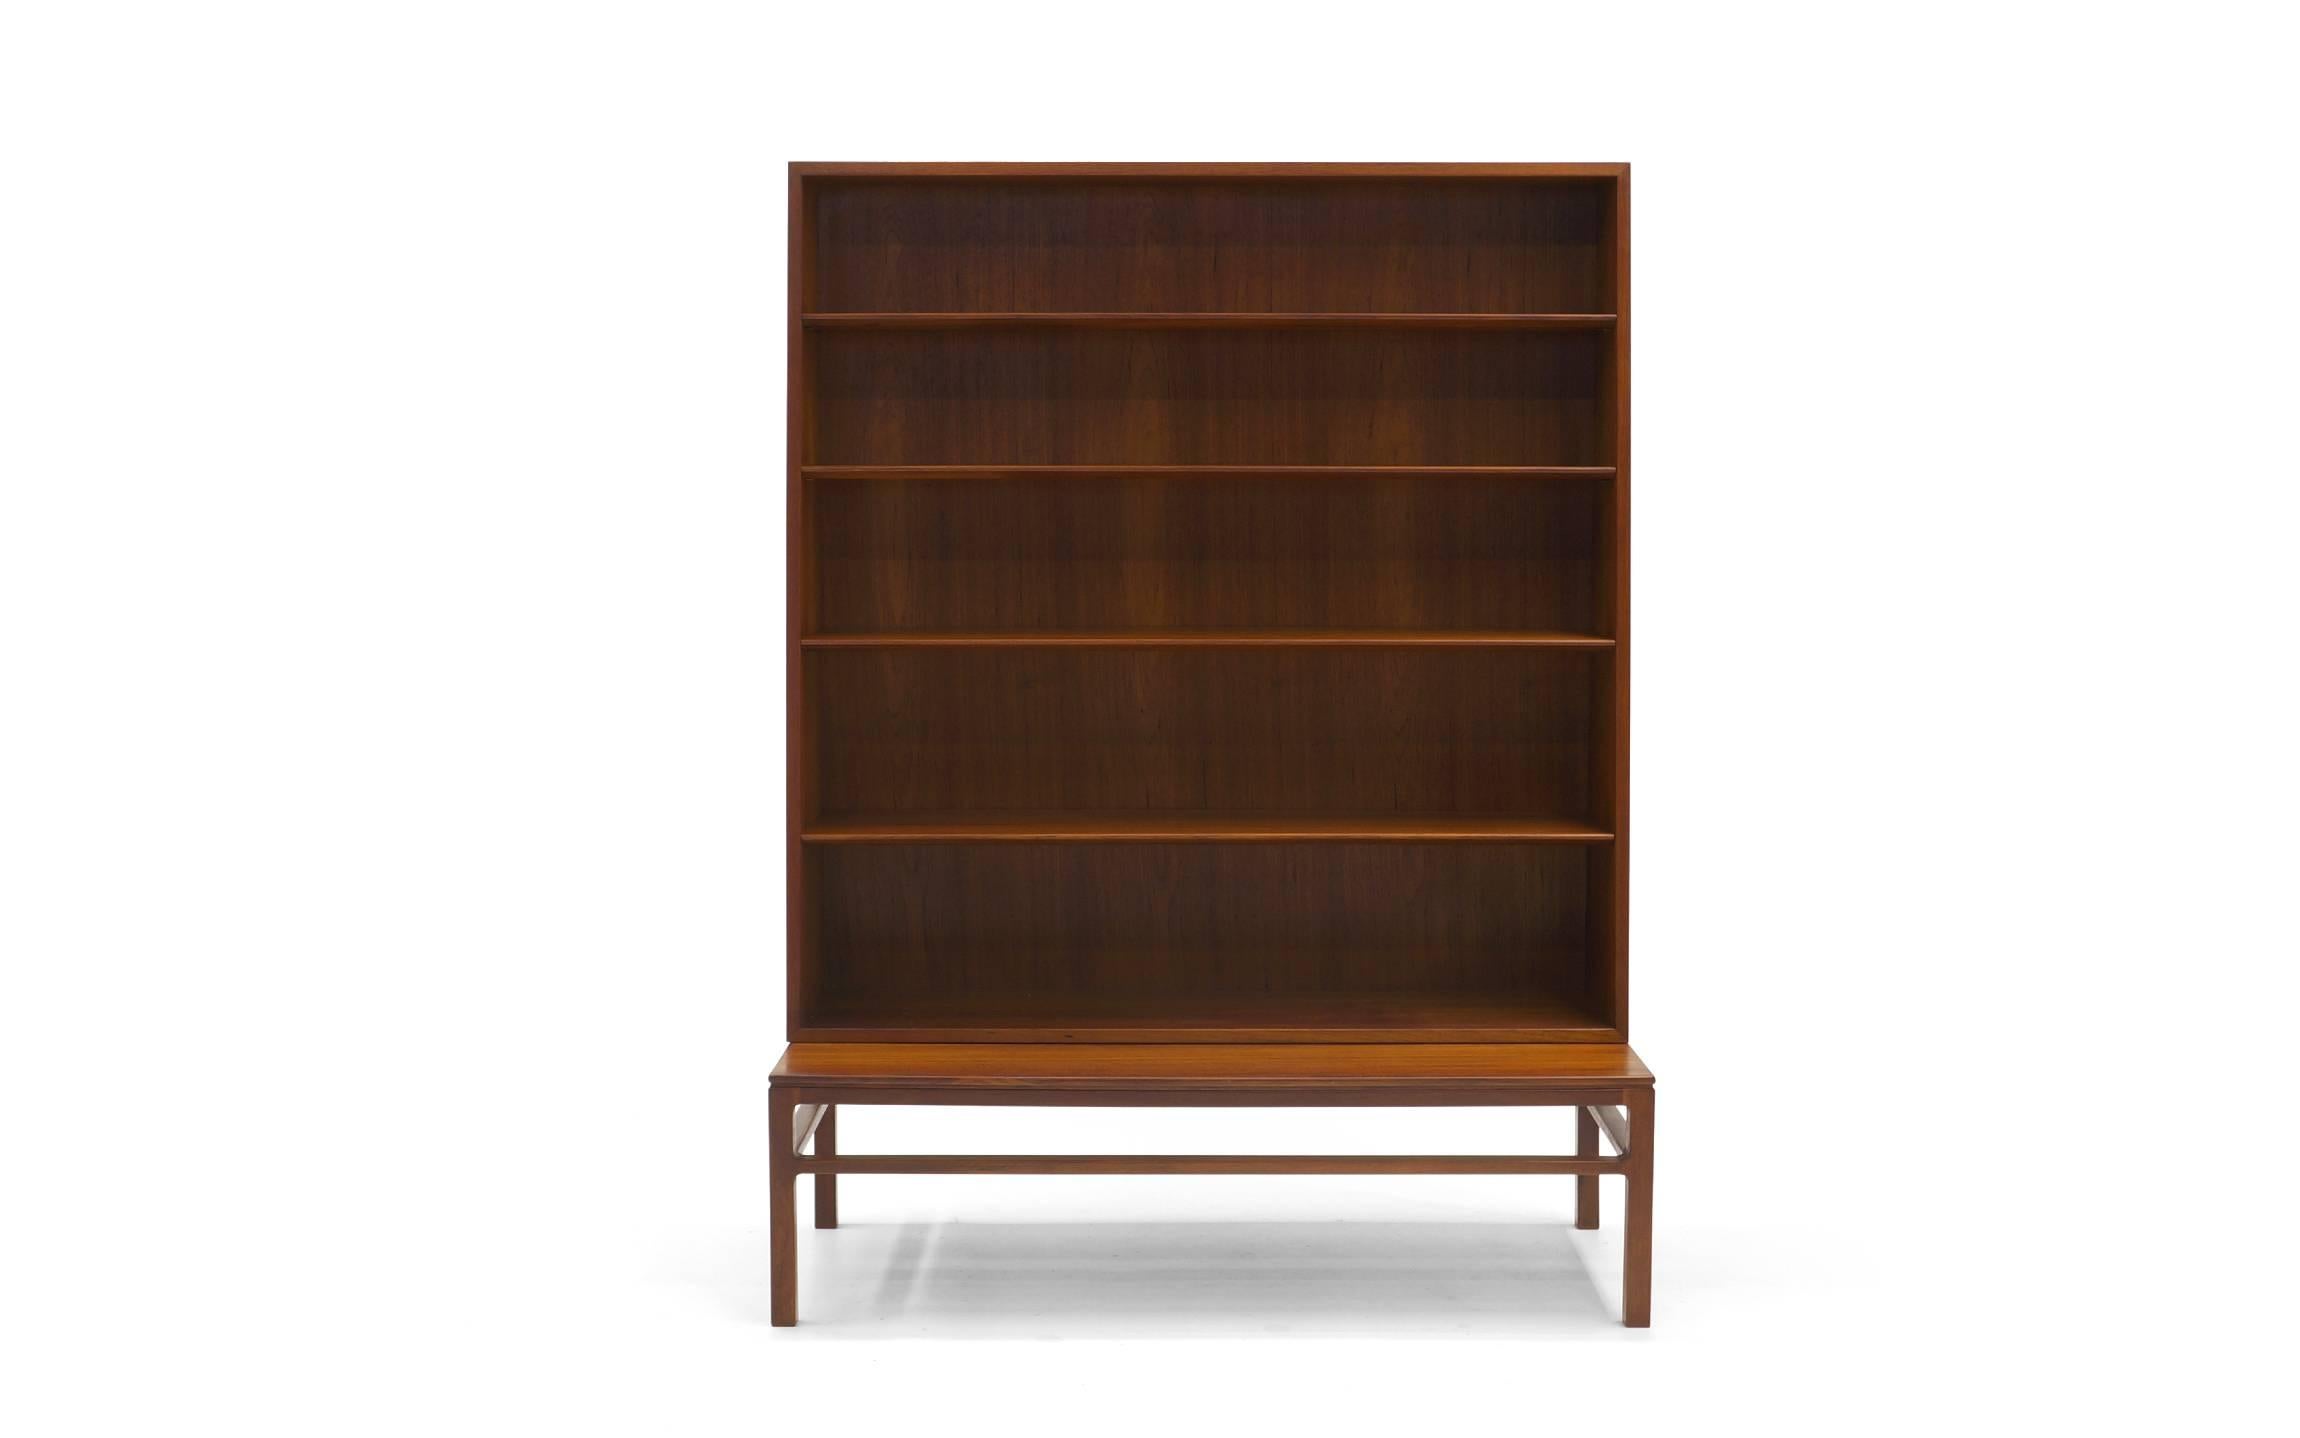 Hans Olsen rosewood bookcase. Two pieces for versatility and ease of moving. The book case tapers as it rises. Base/table height is 13.5 inches. Overall dimensions are below. Signed with Illums Bolighus metal tag.